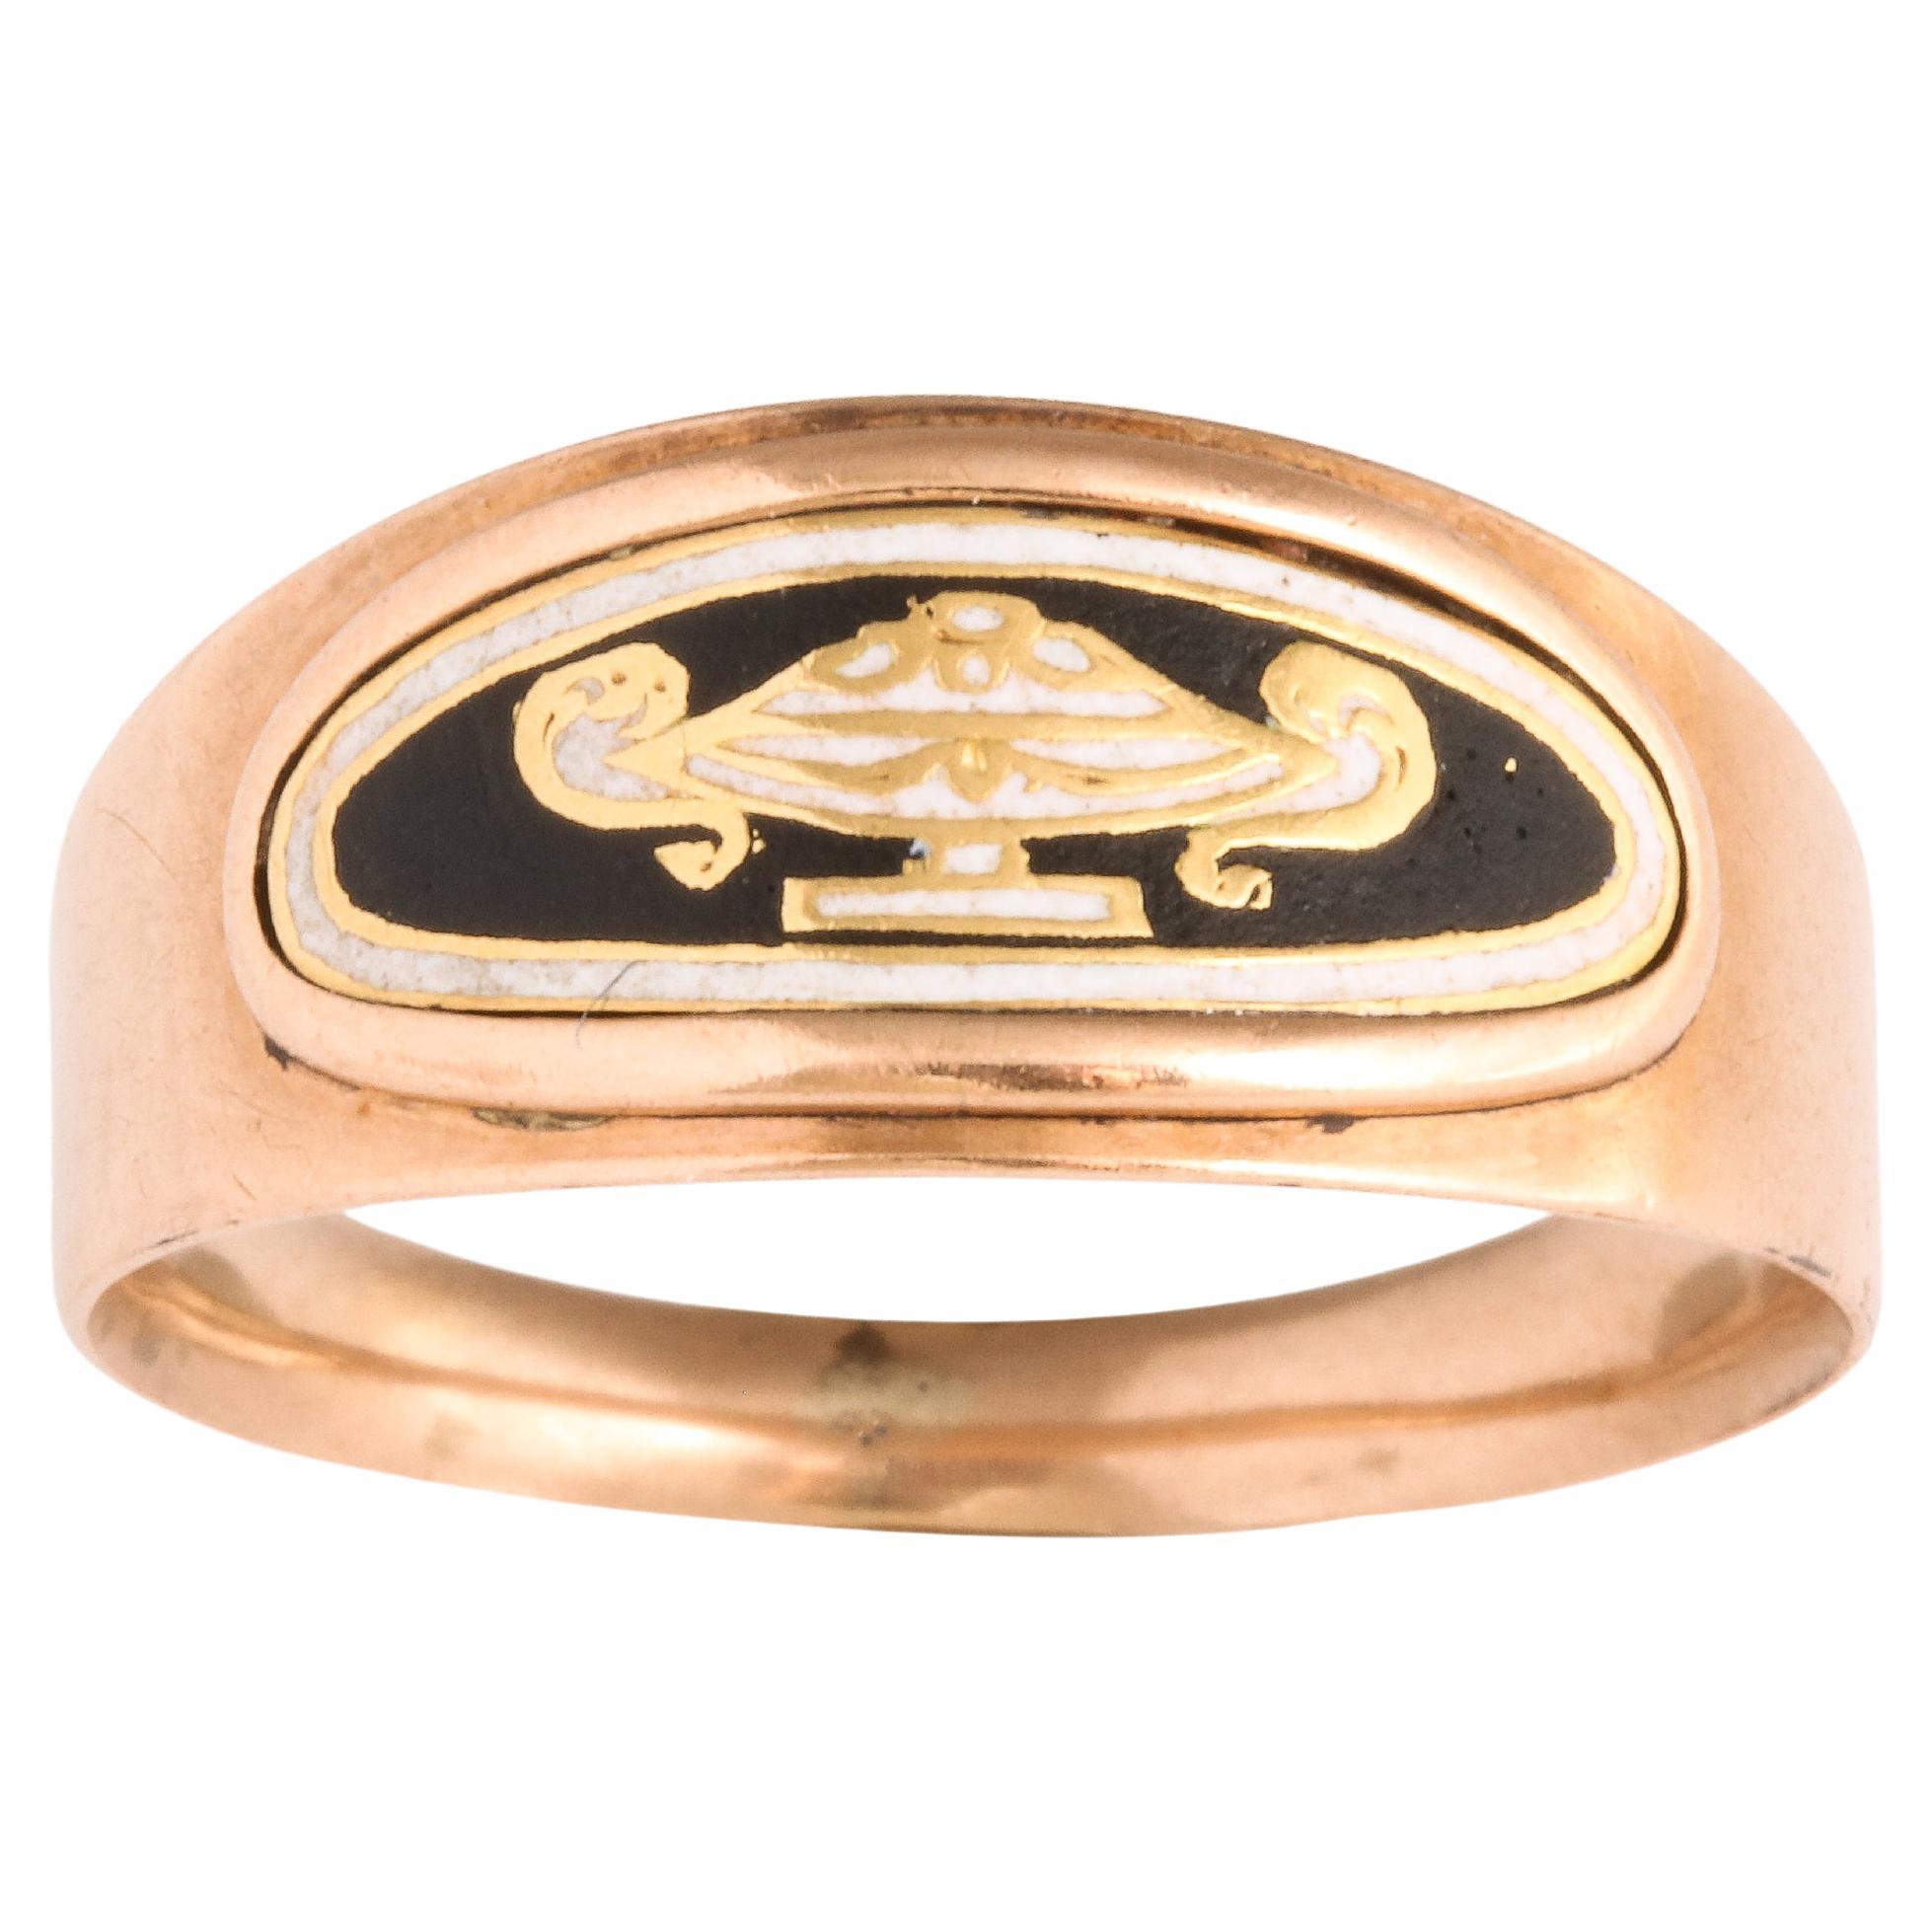   I love the proportion of this Gold and enamel Georgian urn ring. I previously sold a larger octagonal version and this proportion attracts me even more. Can you image this is a memorial ring honoring Katherine Whitby who died in 1803 at 72 years